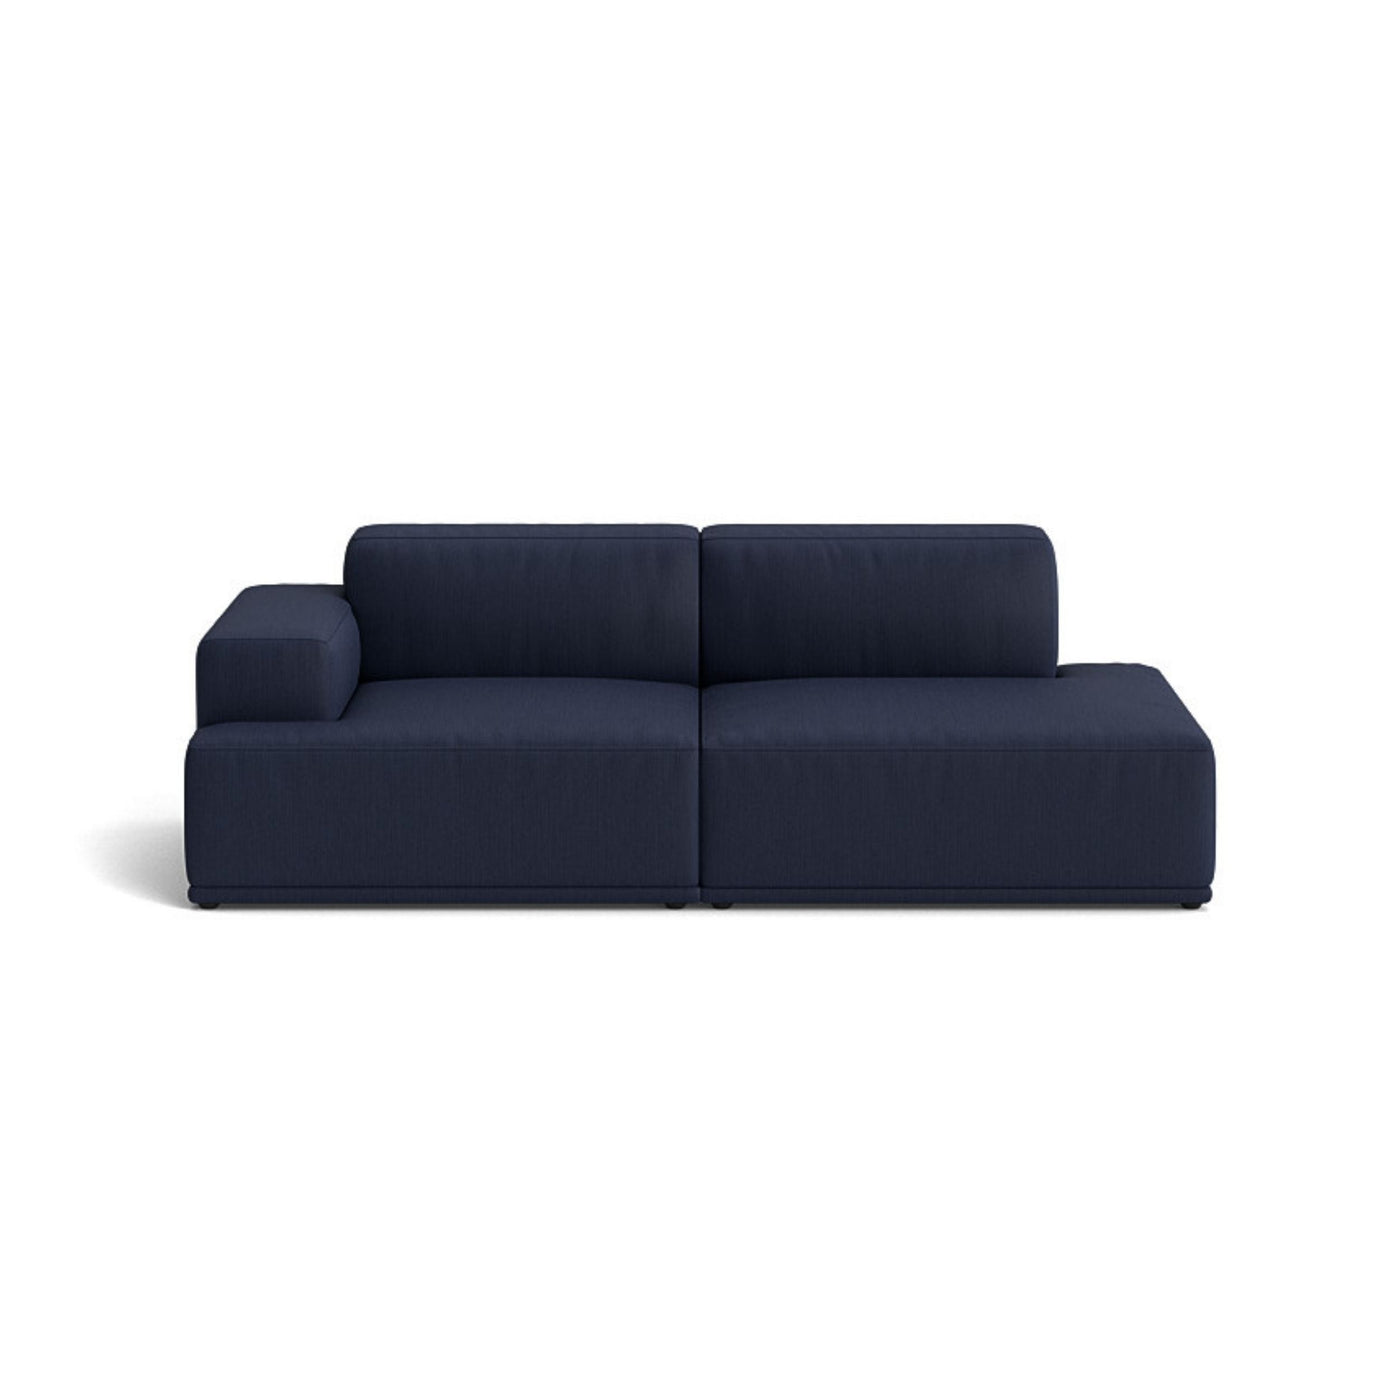 Muuto Connect Soft Modular 2 Seater Sofa, configuration 2. made-to-order from someday designs. #colour_balder-782